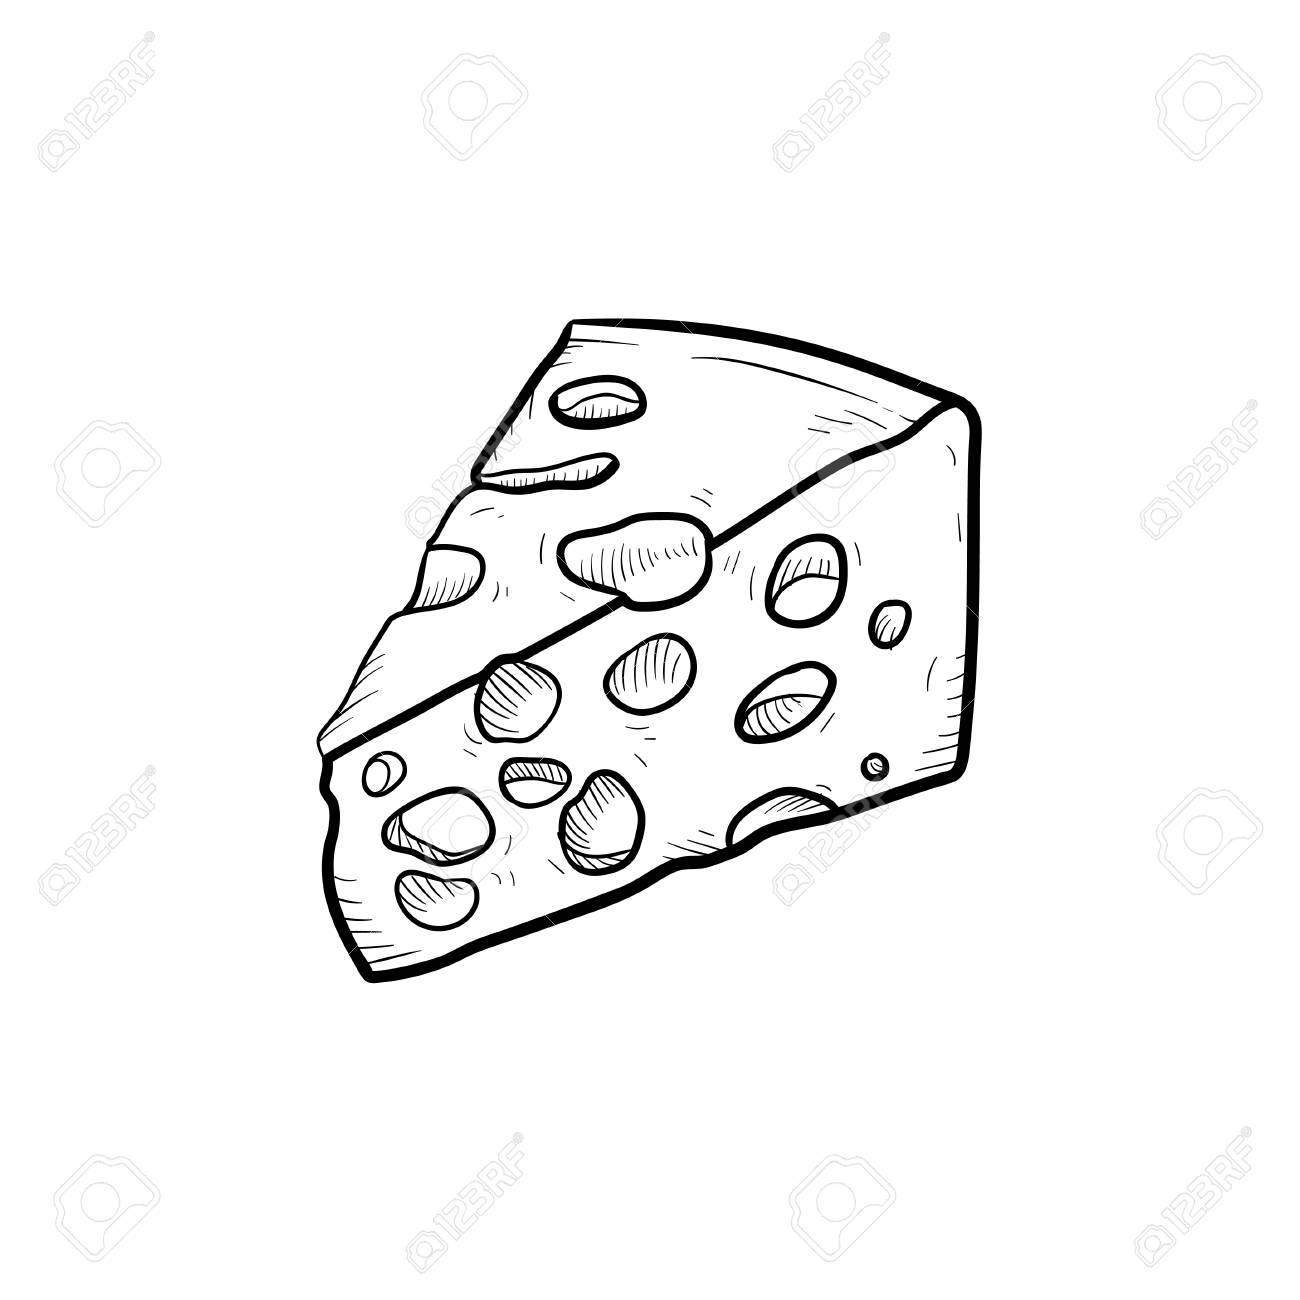 Drawn Cheese outline